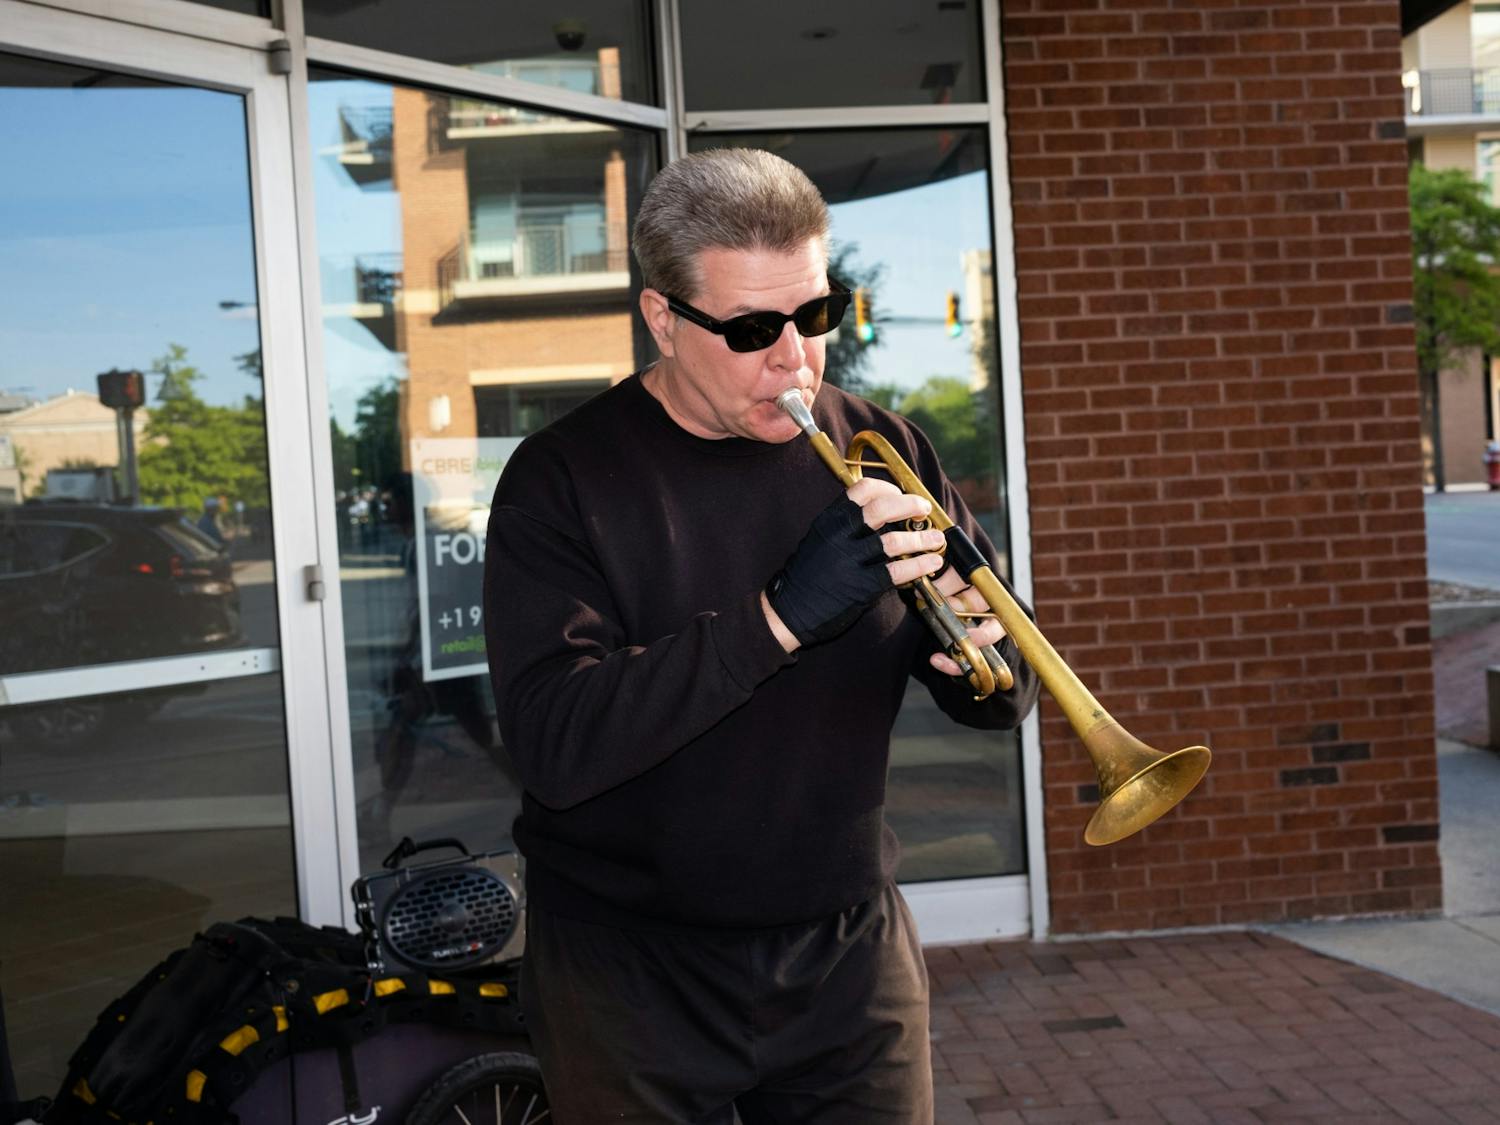 Chris, the trumpet monk, playing his rendition of a Louis Armstrong piece at sunset by the corner of Chapel Hill Florist in Chapel Hill, N.C. on April 25th, 2023.